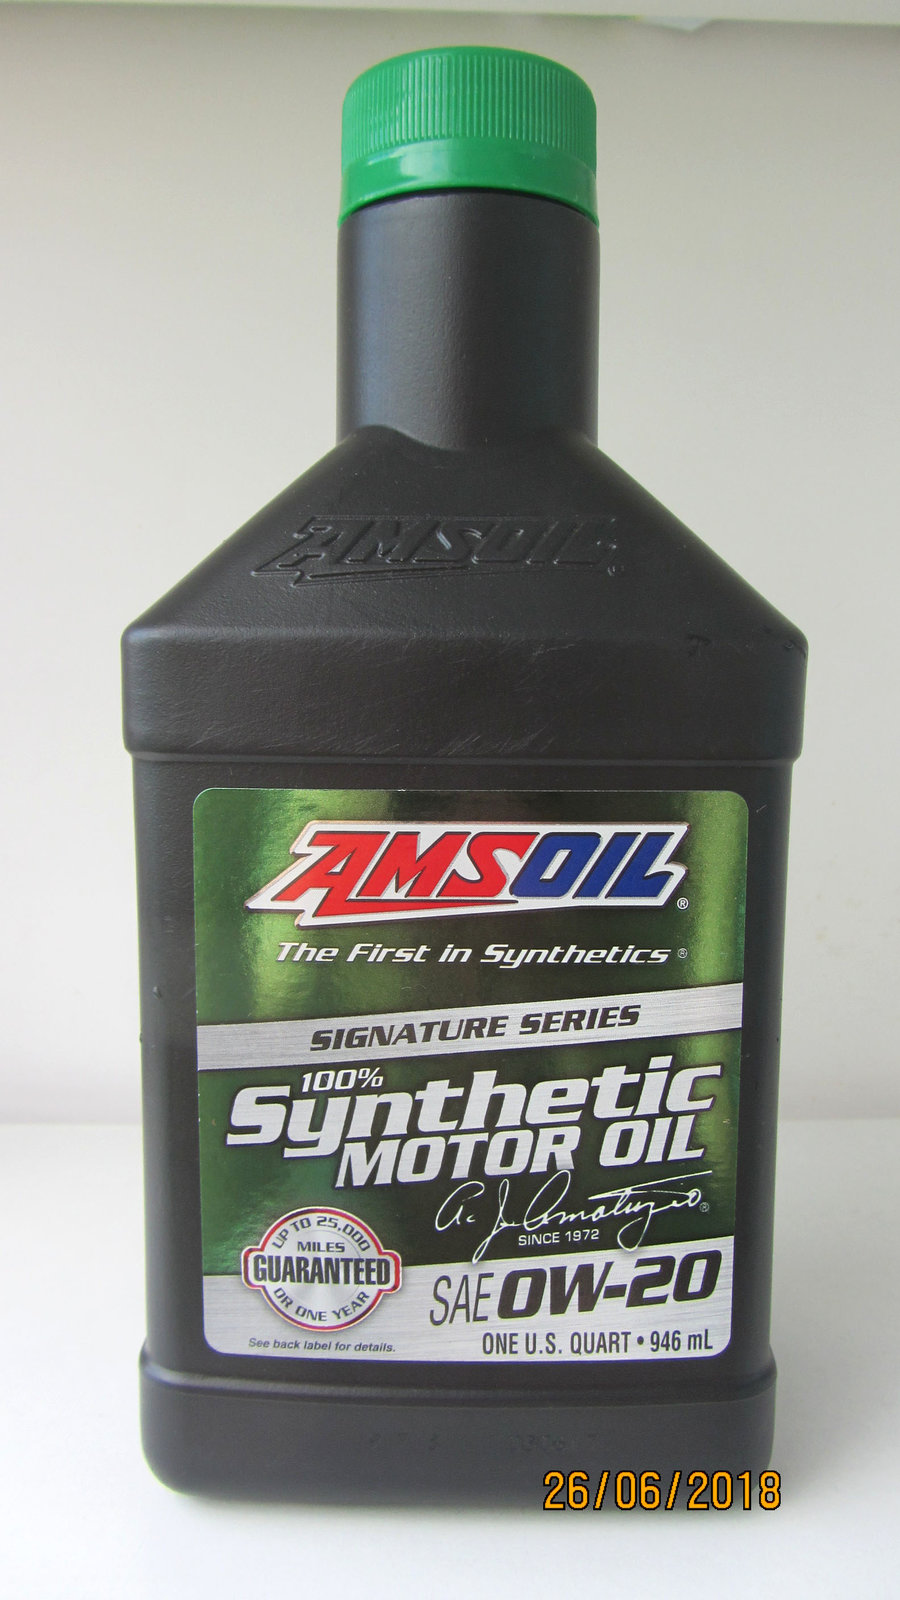 Amsoil signature series synthetic. AMSOIL 0w20. 0w-20 AMSOIL SS. АМСОИЛ сигнатуре Сериес 0w20. AMSOIL 0w16.